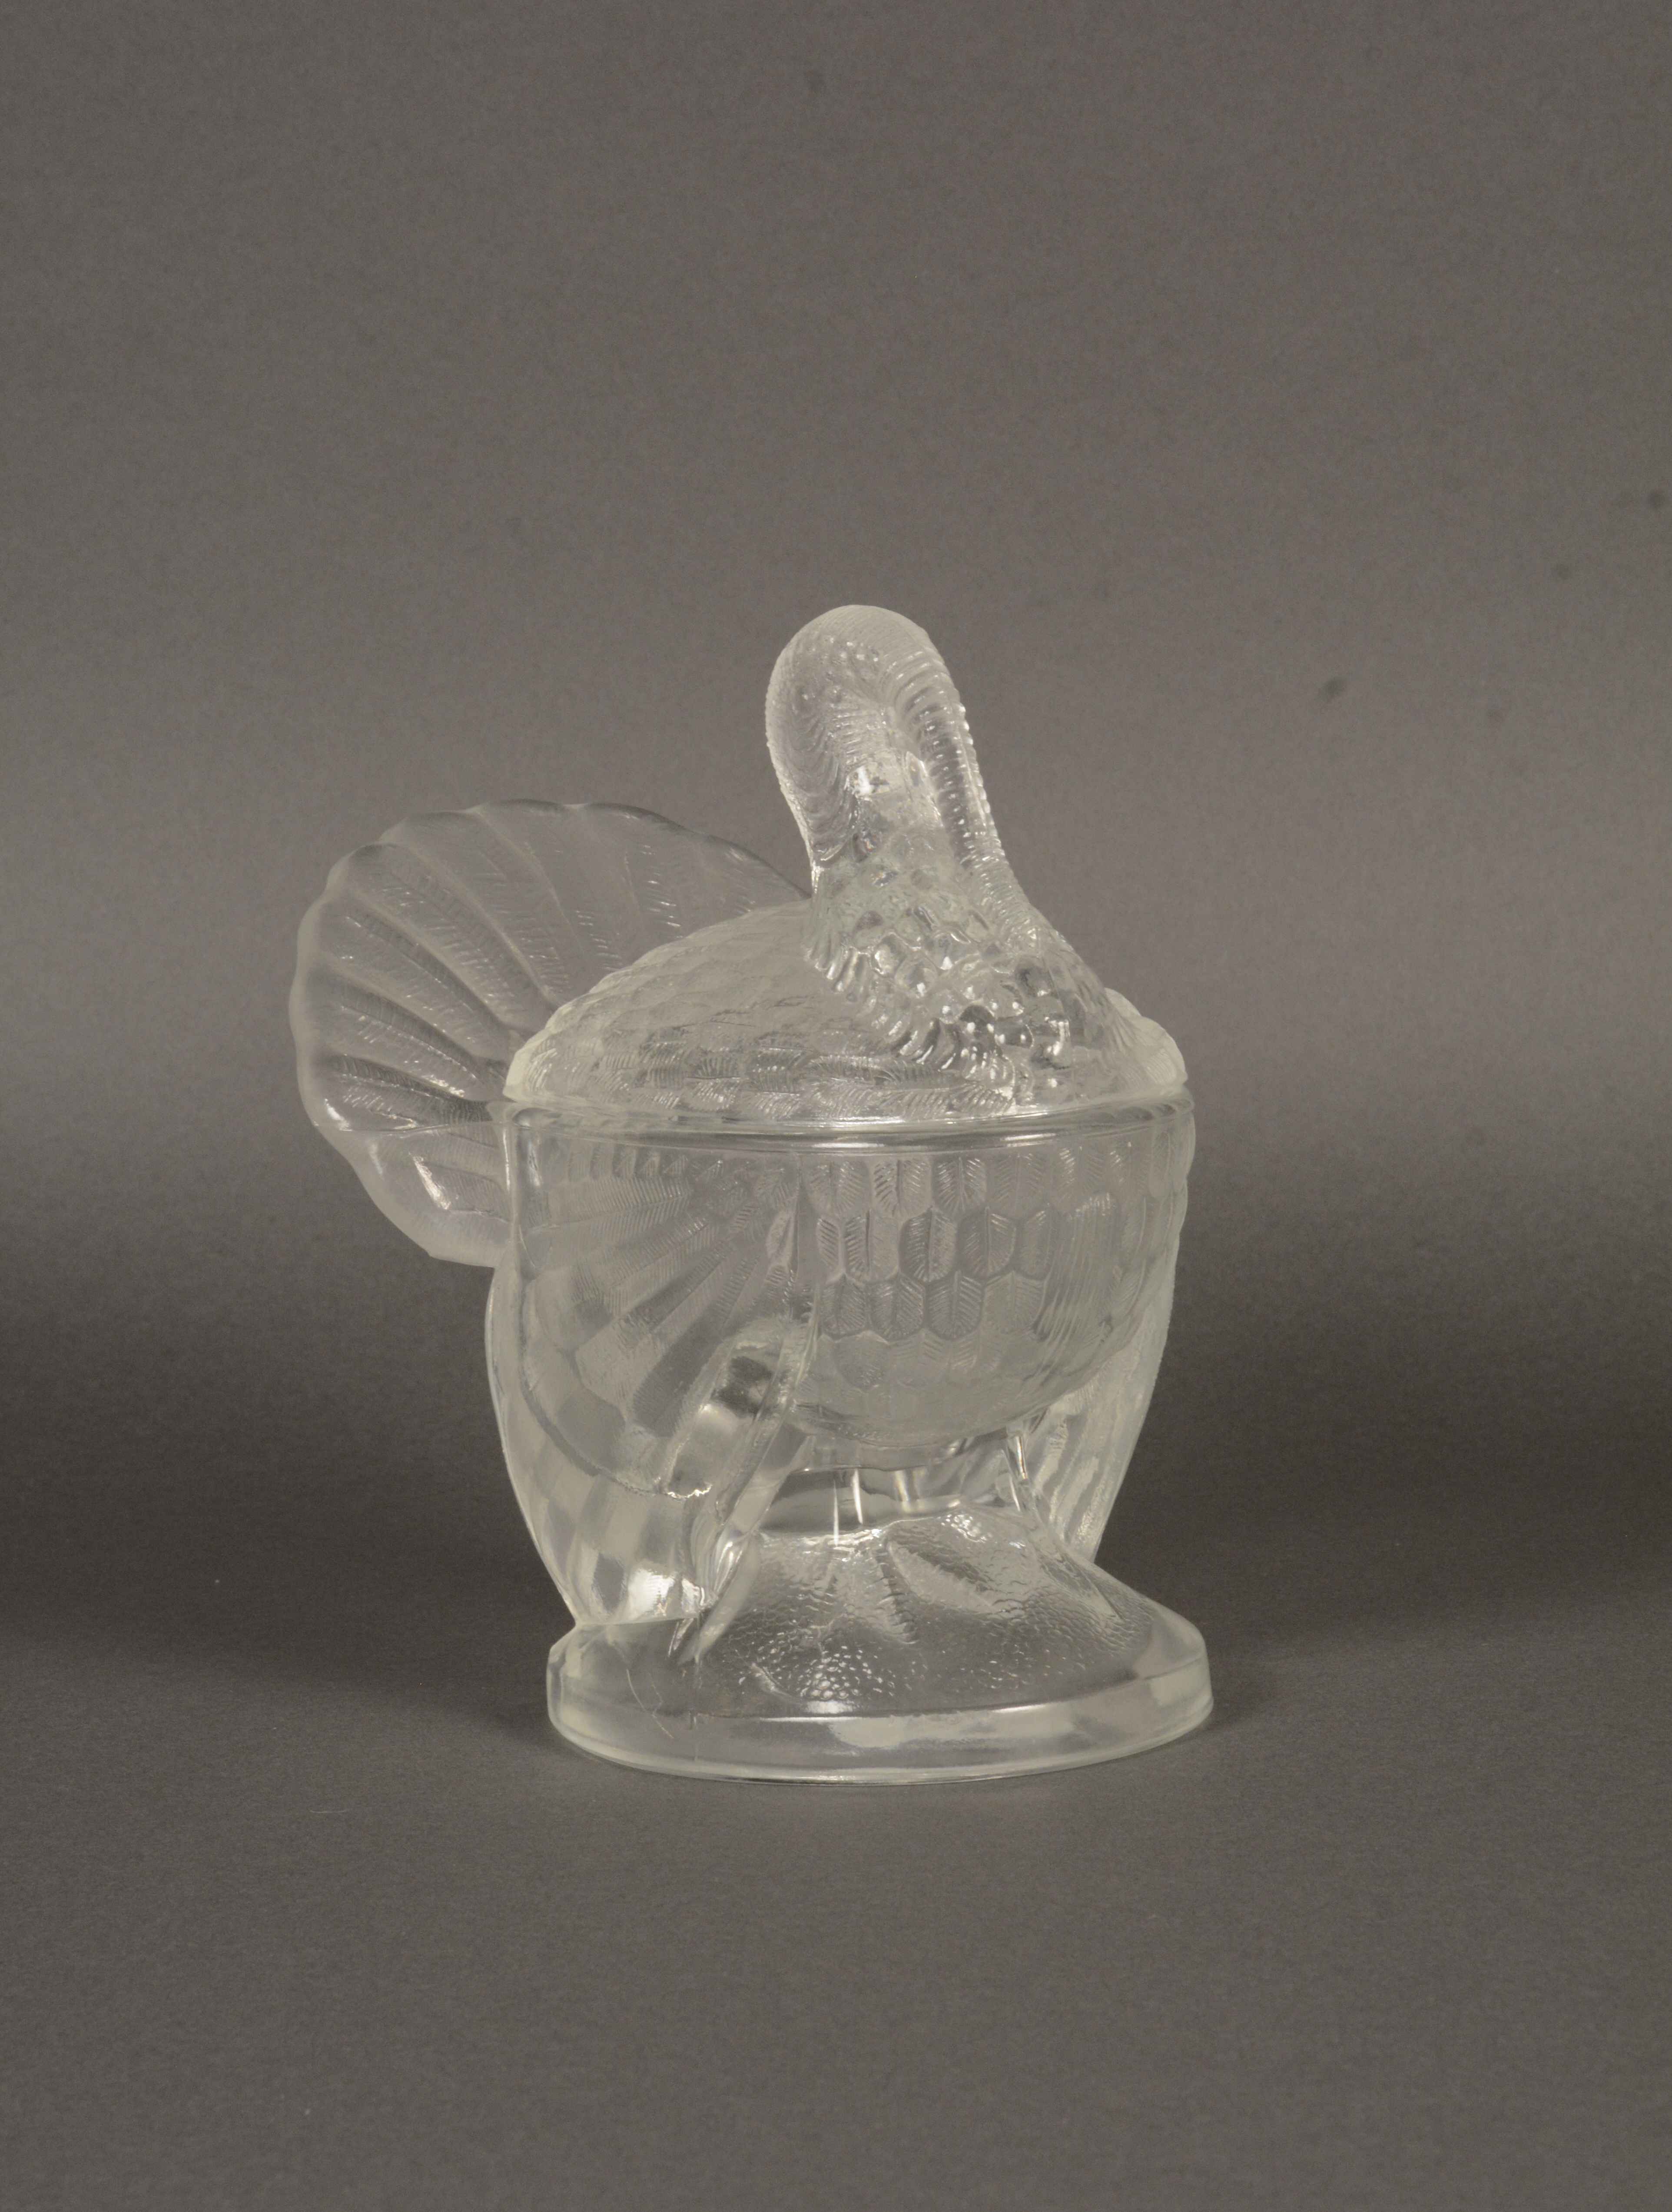 L.E. Smith Glass Company produced the first glass turkeys in 1943. Capable of holding soup, candy, or even cranberry sauce, this glass bird is an excellent table decoration for the holidays. Gift of L.E. Smith Glass Company.